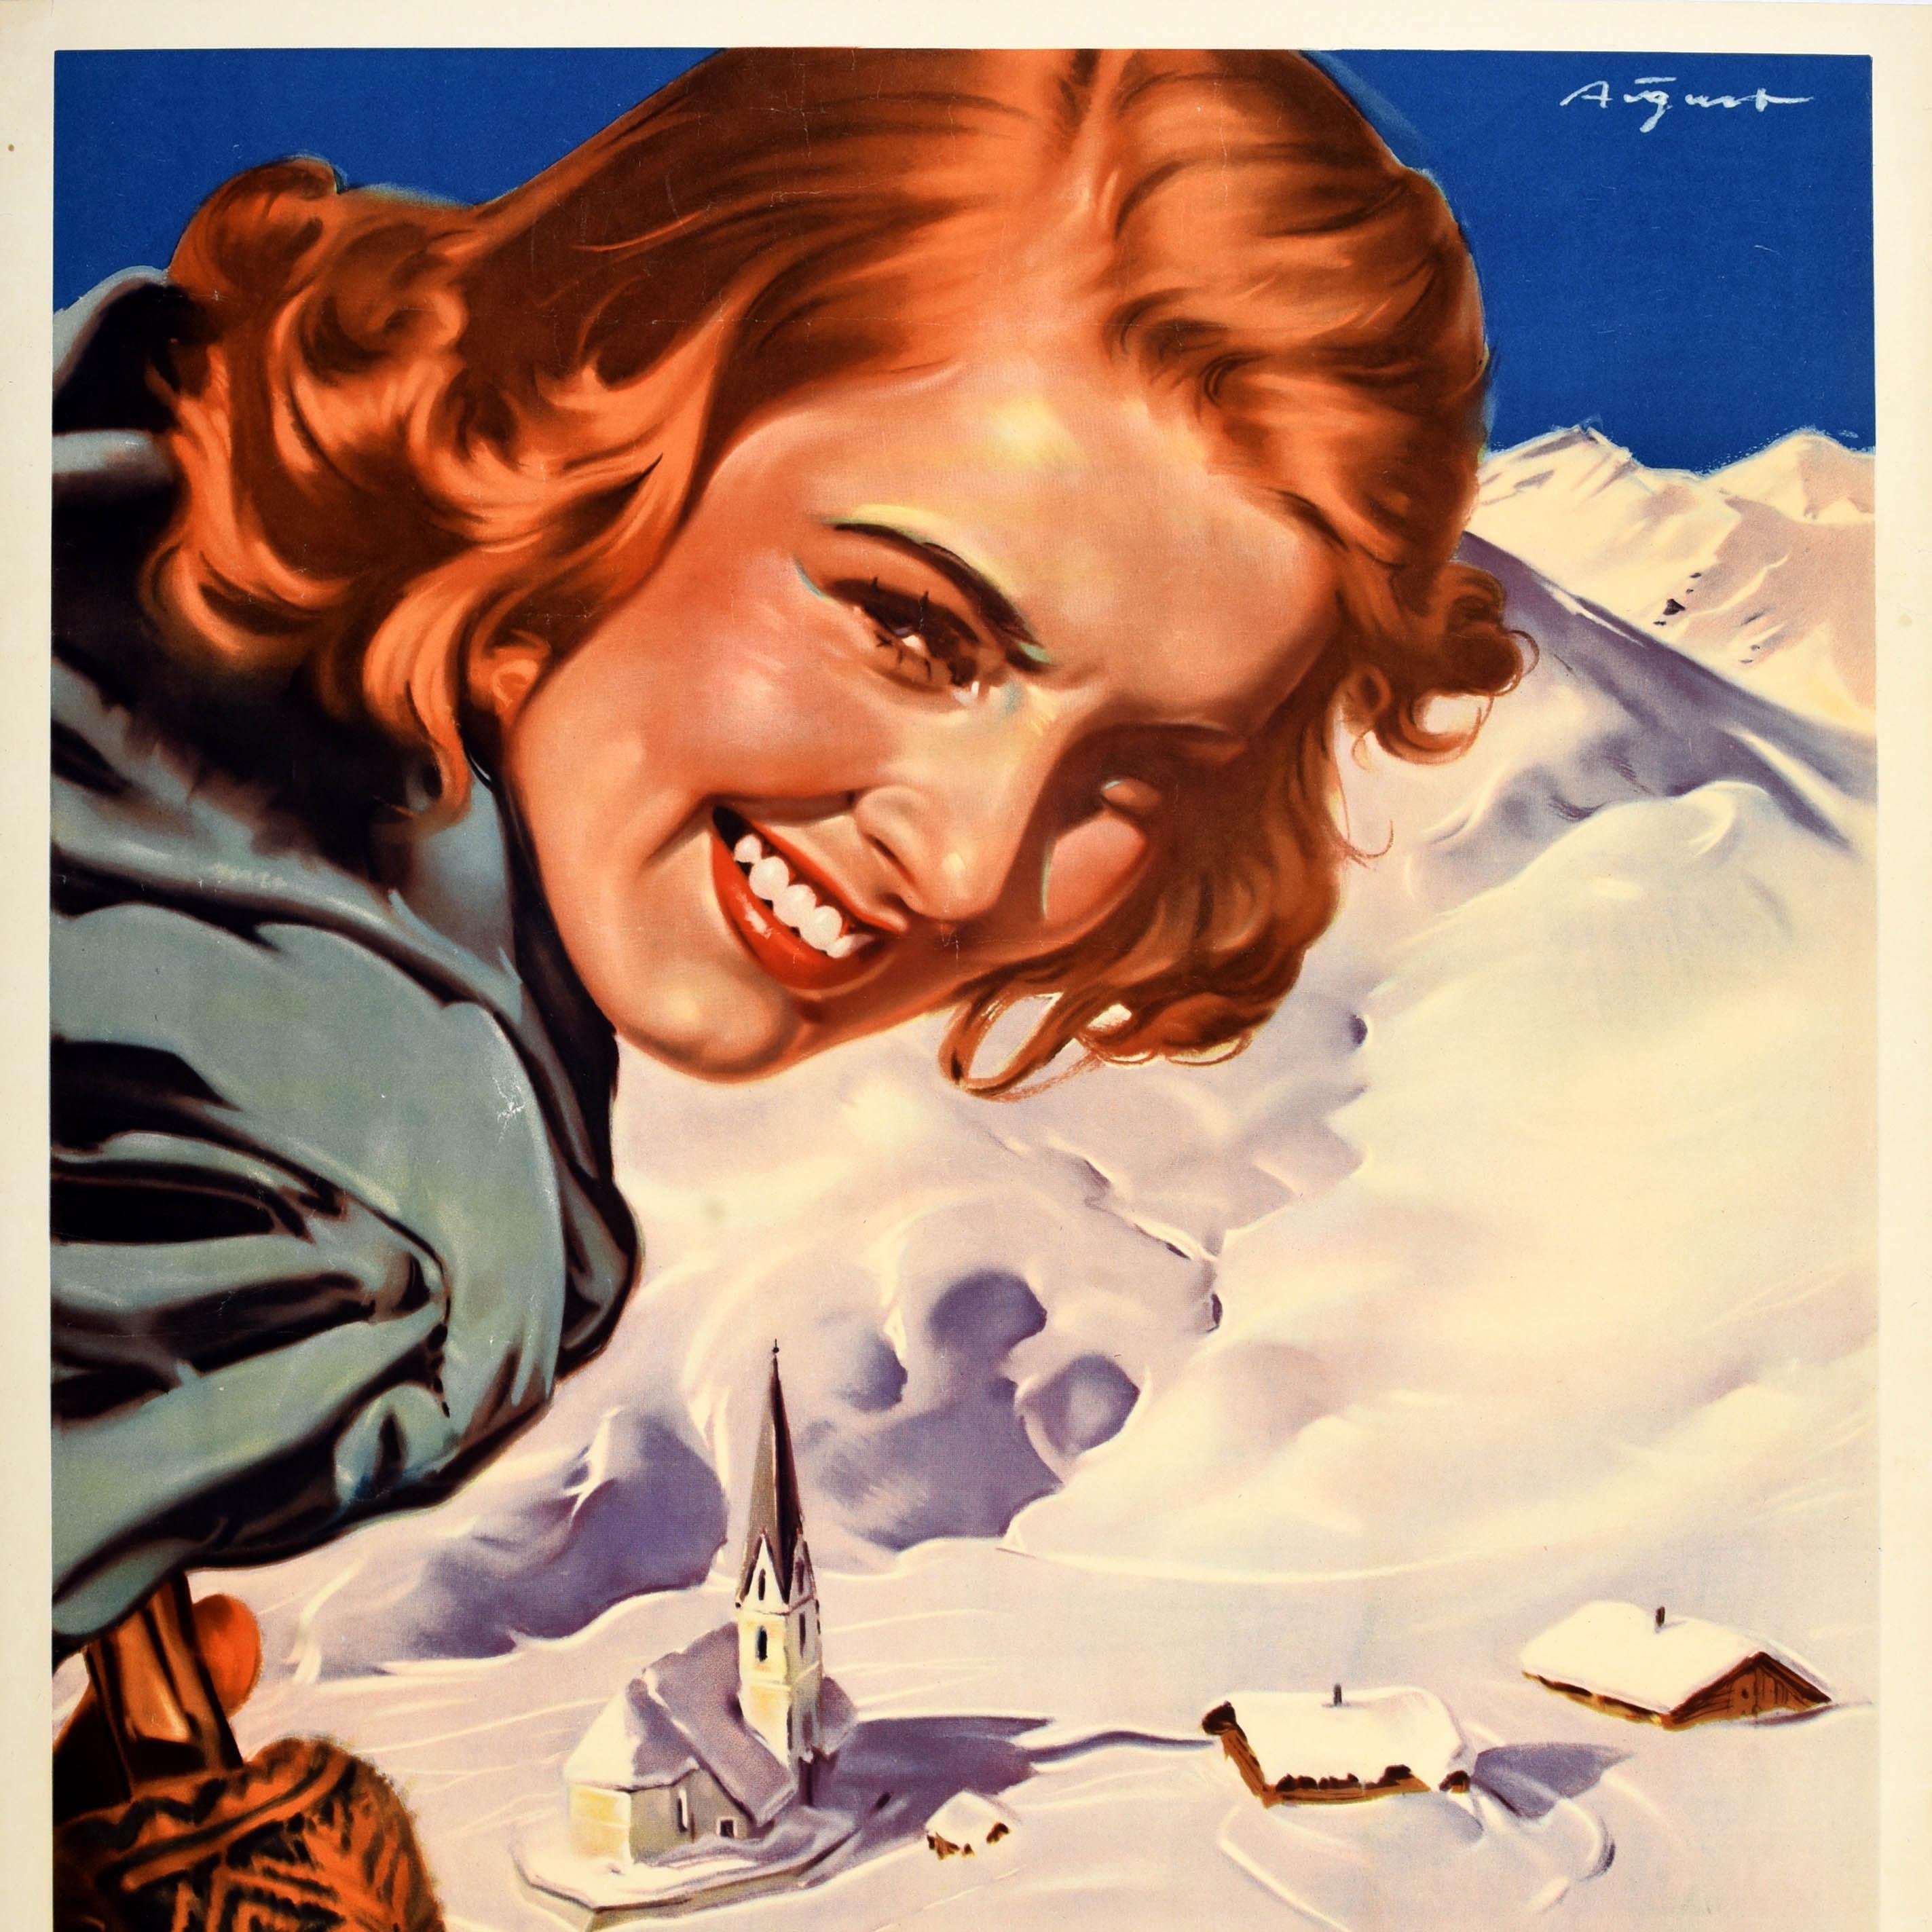 Original Vintage Skiing Travel Poster Winter Sports in Austria Paul Aigner For Sale 2